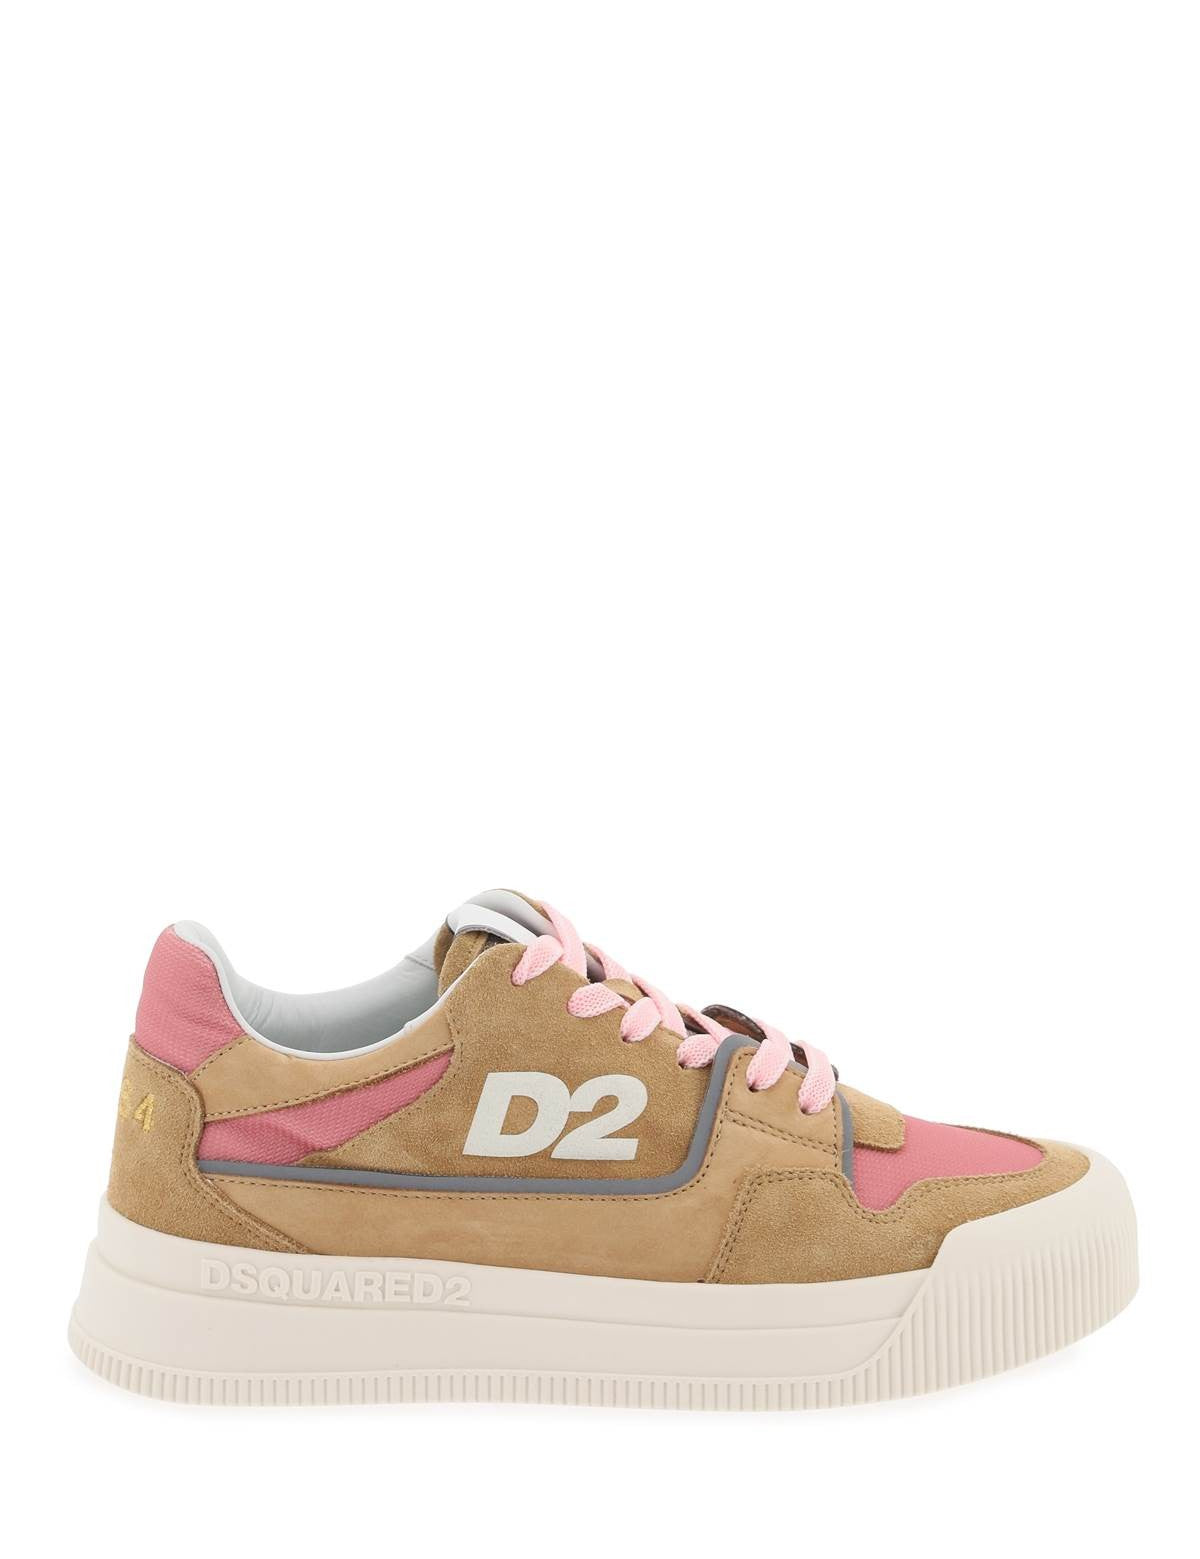 dsquared2-suede-new-jersey-sneakers-in-leather.jpg